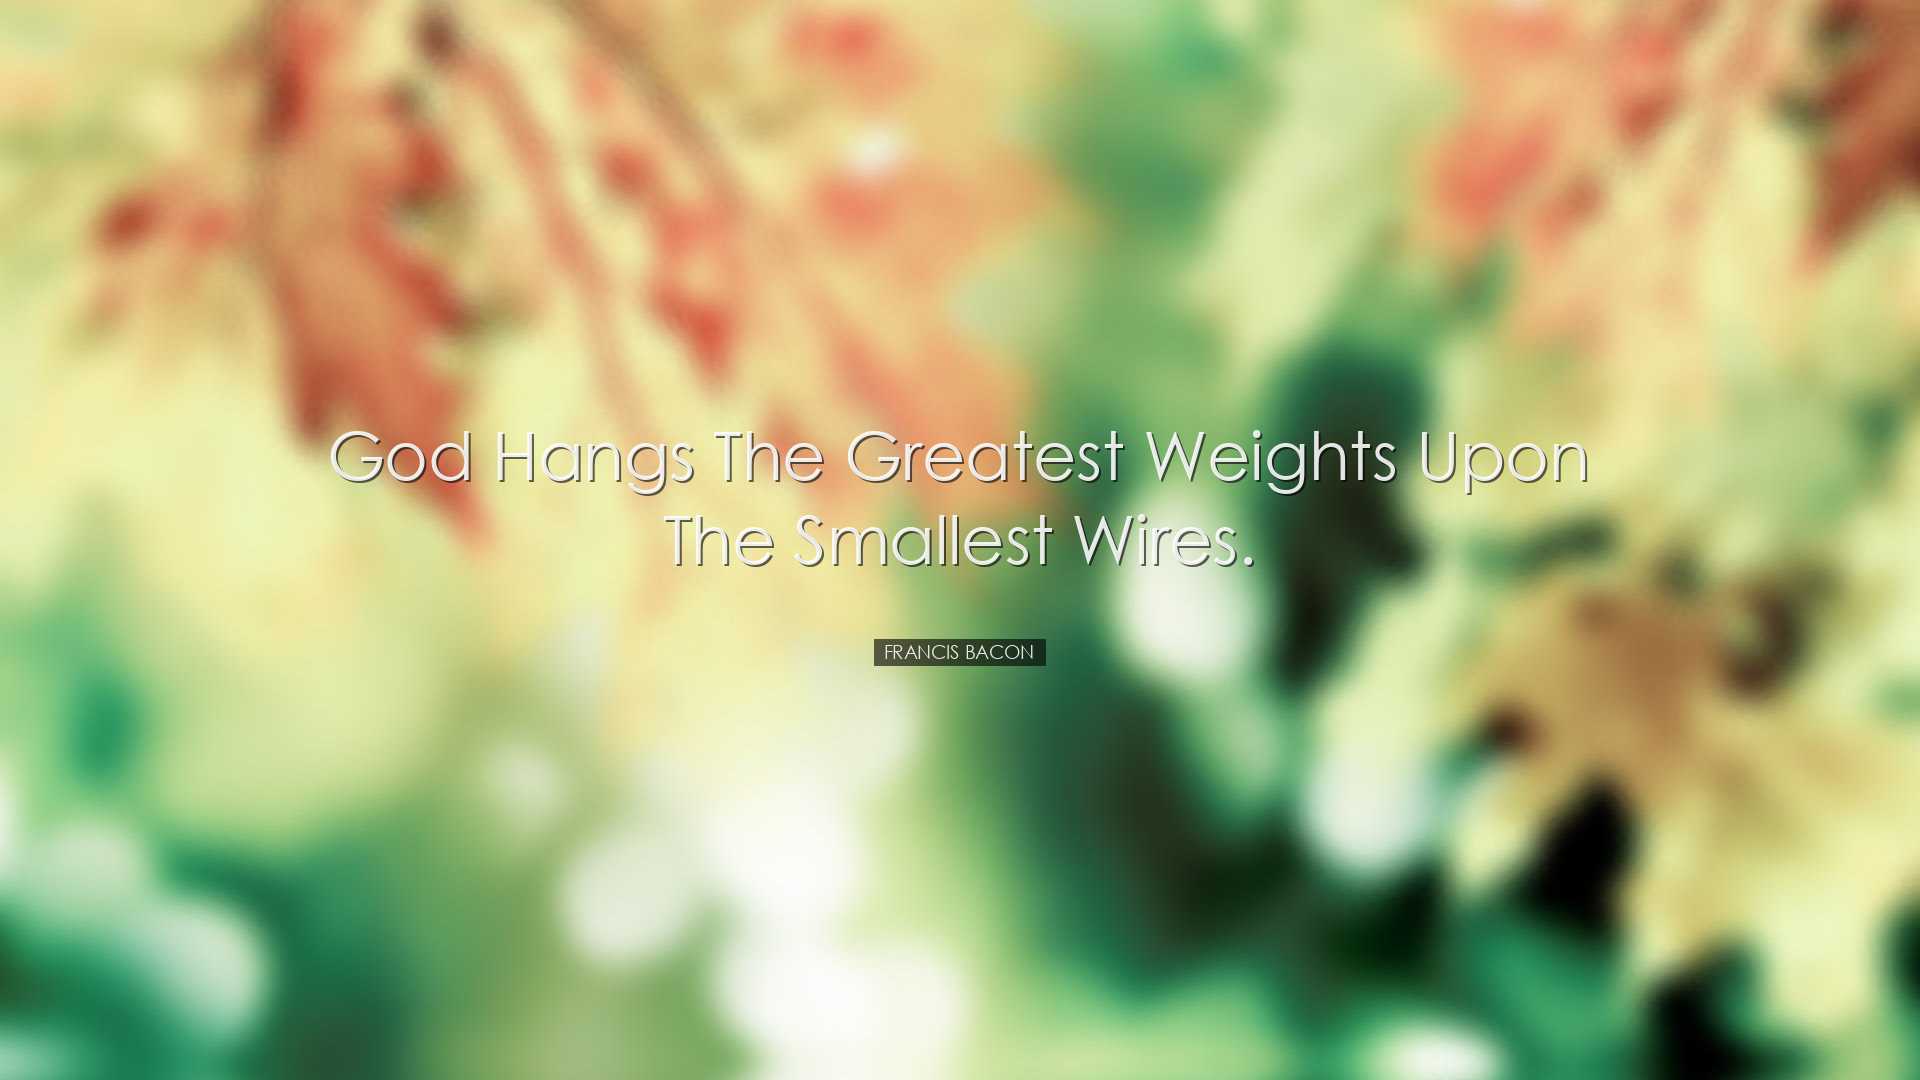 God hangs the greatest weights upon the smallest wires. - Francis